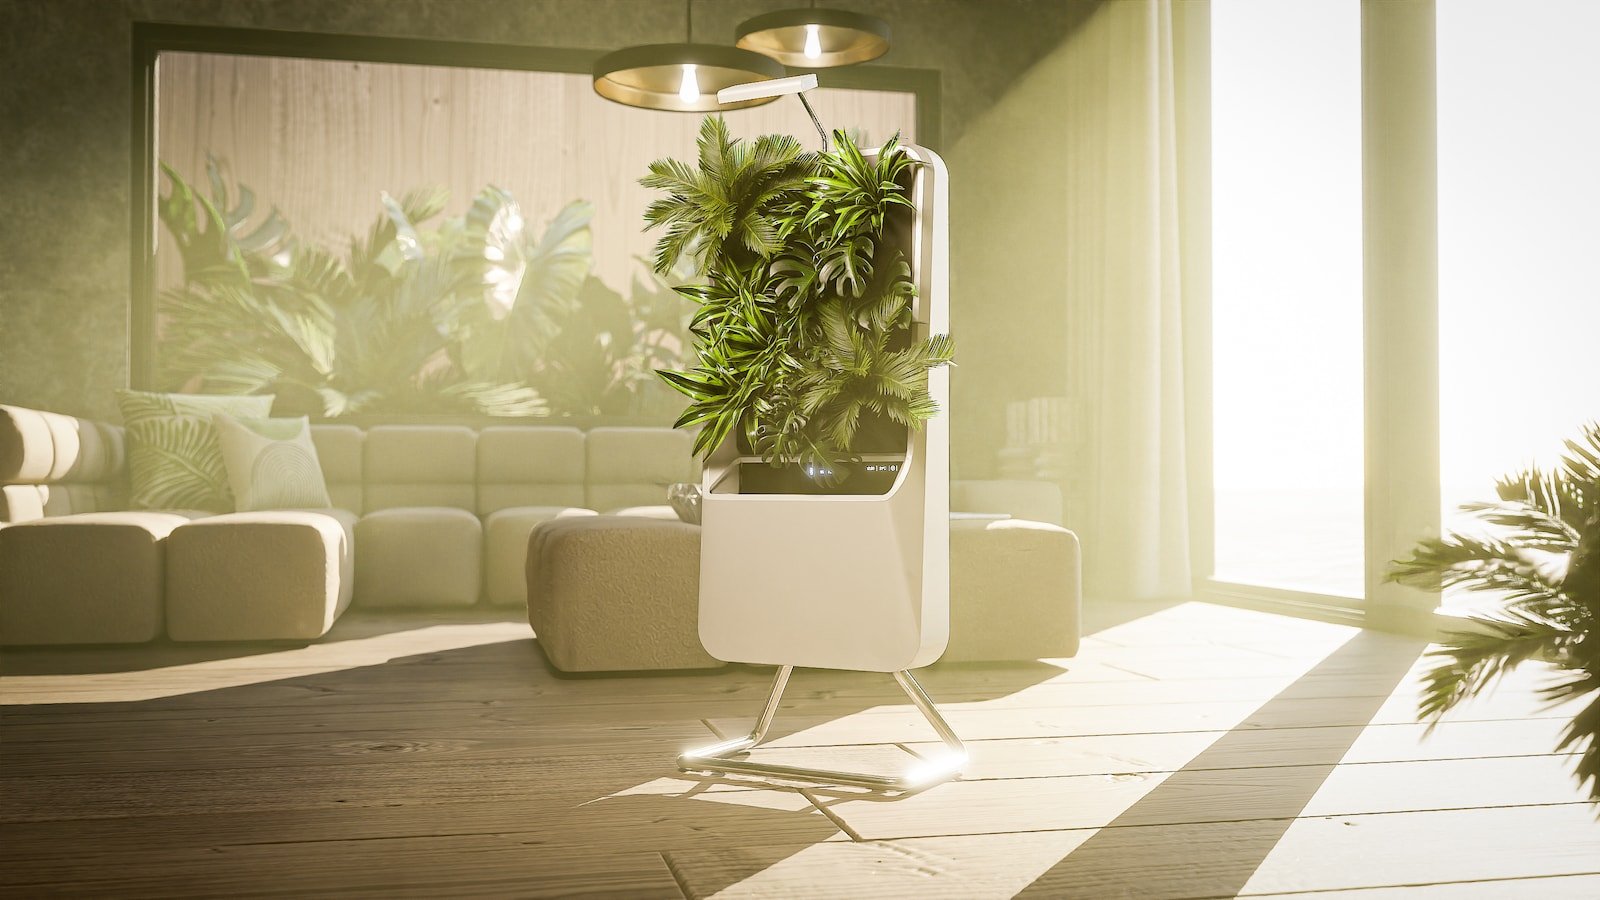 Respira smart air-purifying garden allows you to connect with nature at home